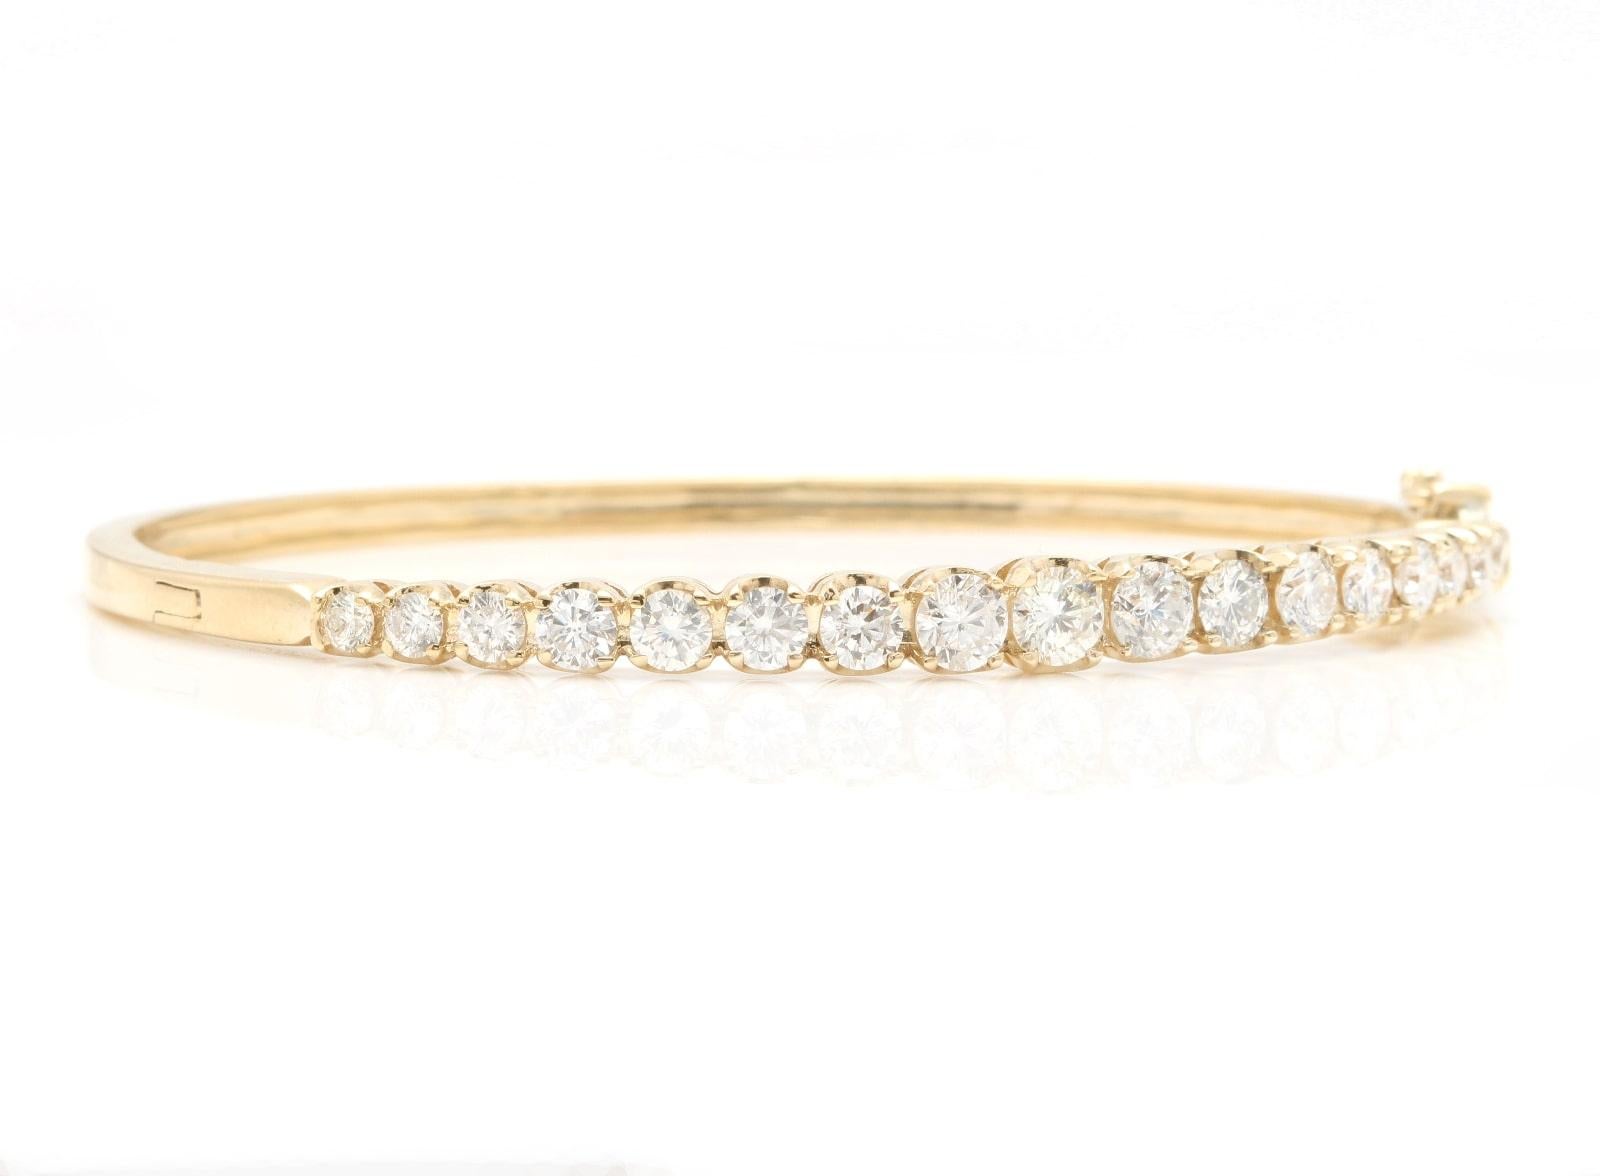 Very Impressive 3.40 Carats Natural Diamond 14K Solid Yellow Gold Bangle Bracelet 

Suggested Replacement Value: Approx. $9,000.00

STAMPED: 14K

Total Natural Round Diamonds Weight: Approx. 3.40 Carats (color G-H / Clarity SI1)

Center Diamond